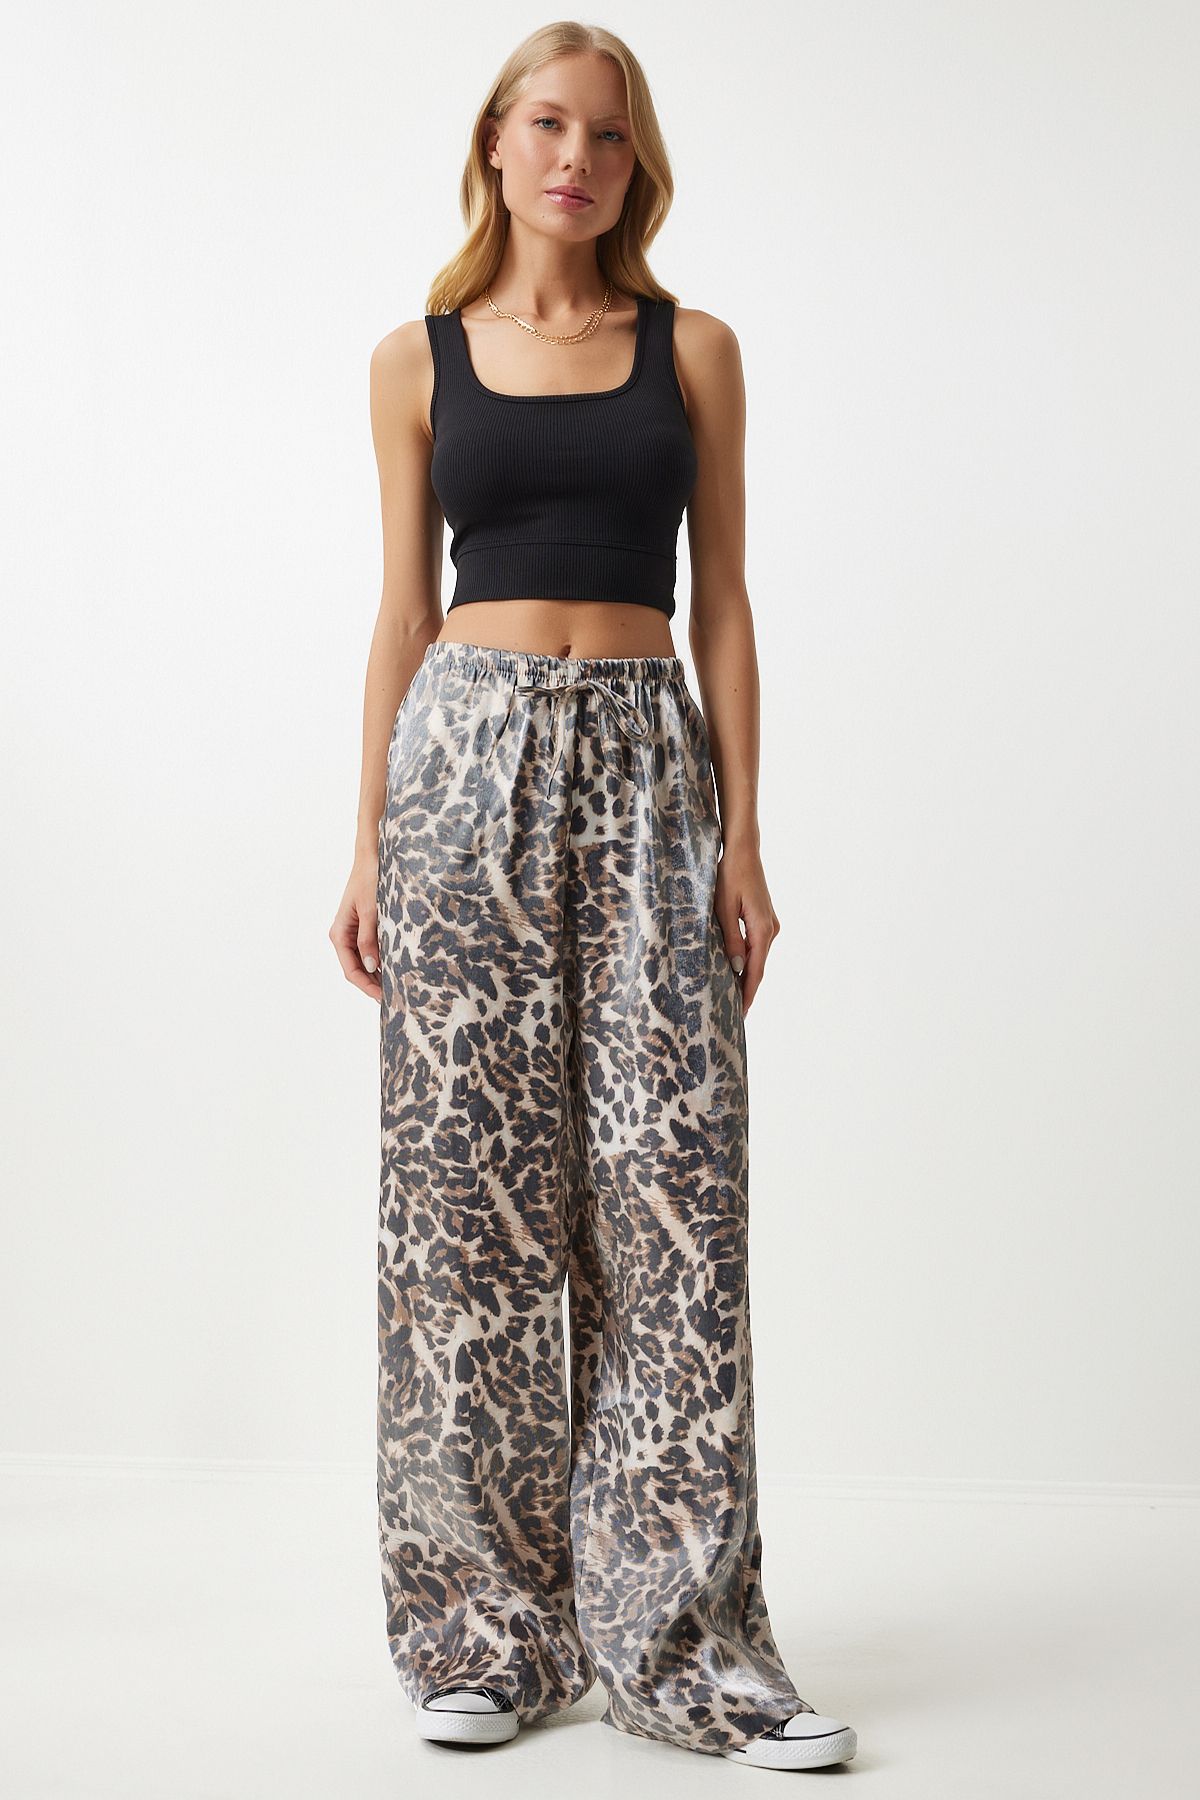 Happiness İstanbul Women's Black Beige Leopard Patterned Palazzo Trousers